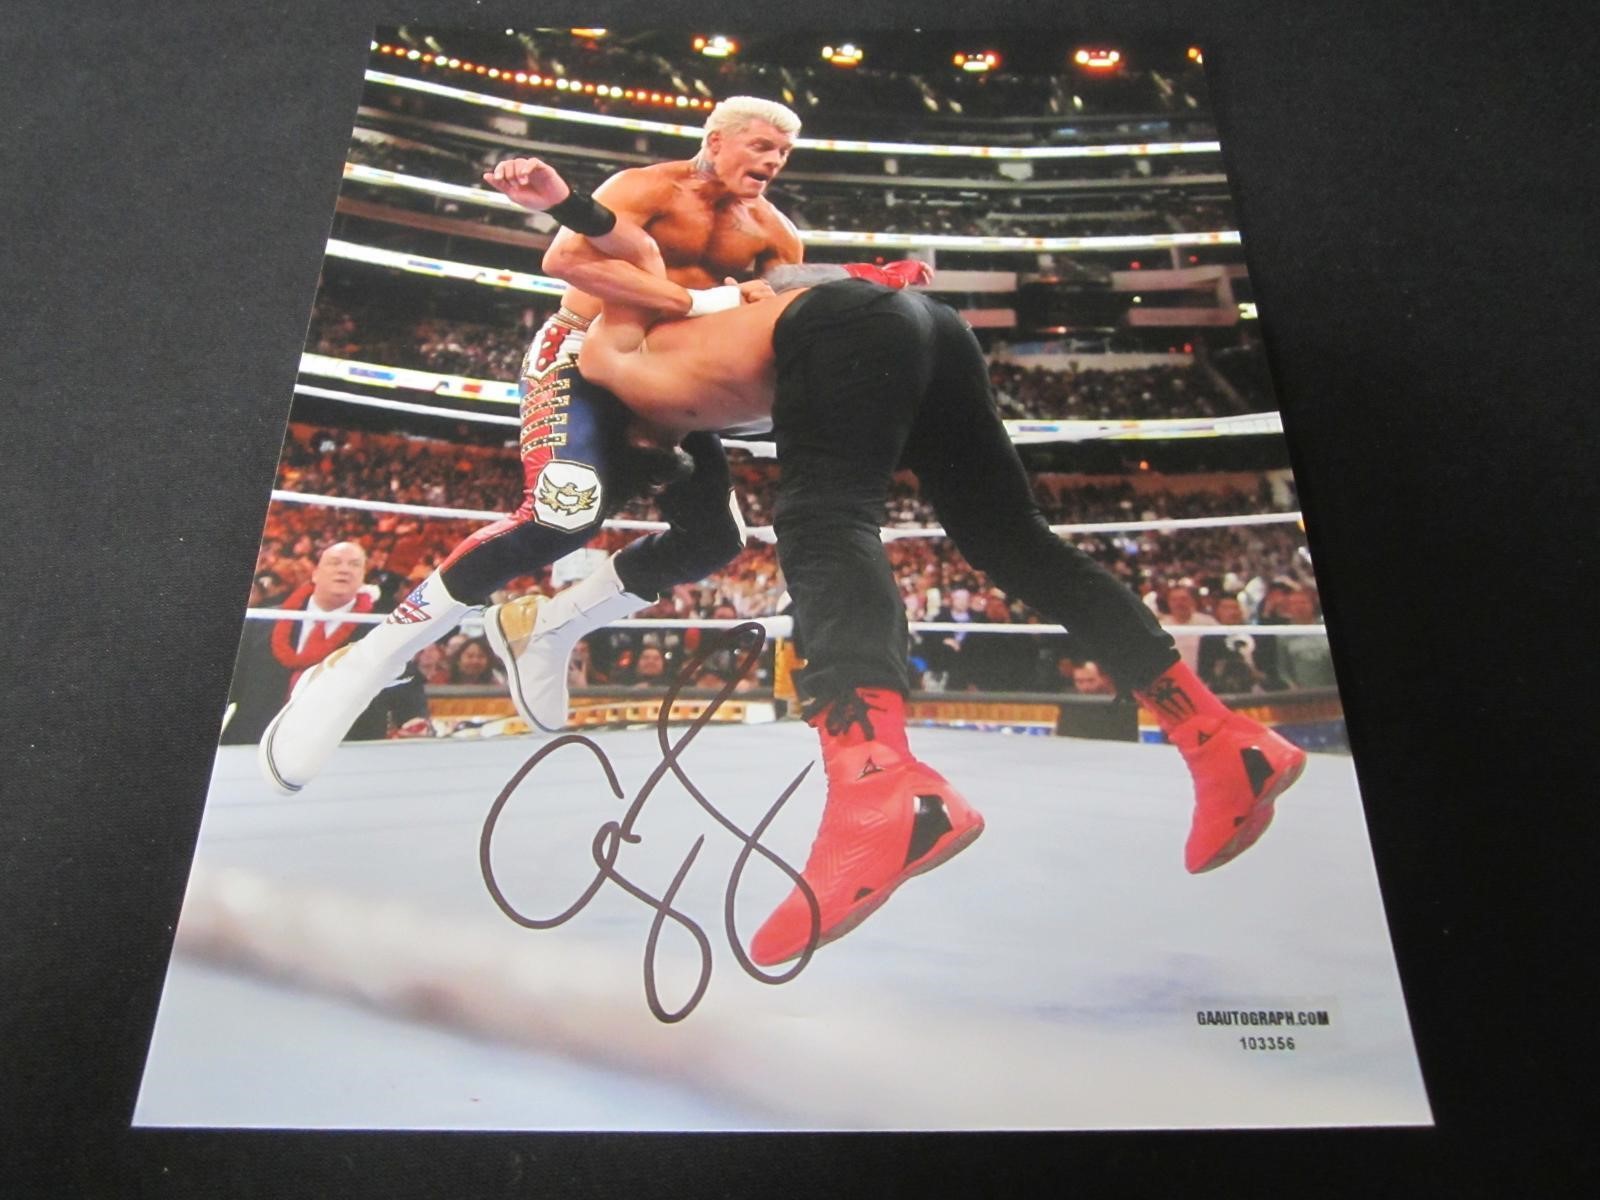 CODY RHODES SIGNED 8X10 PHOTO WITH COA